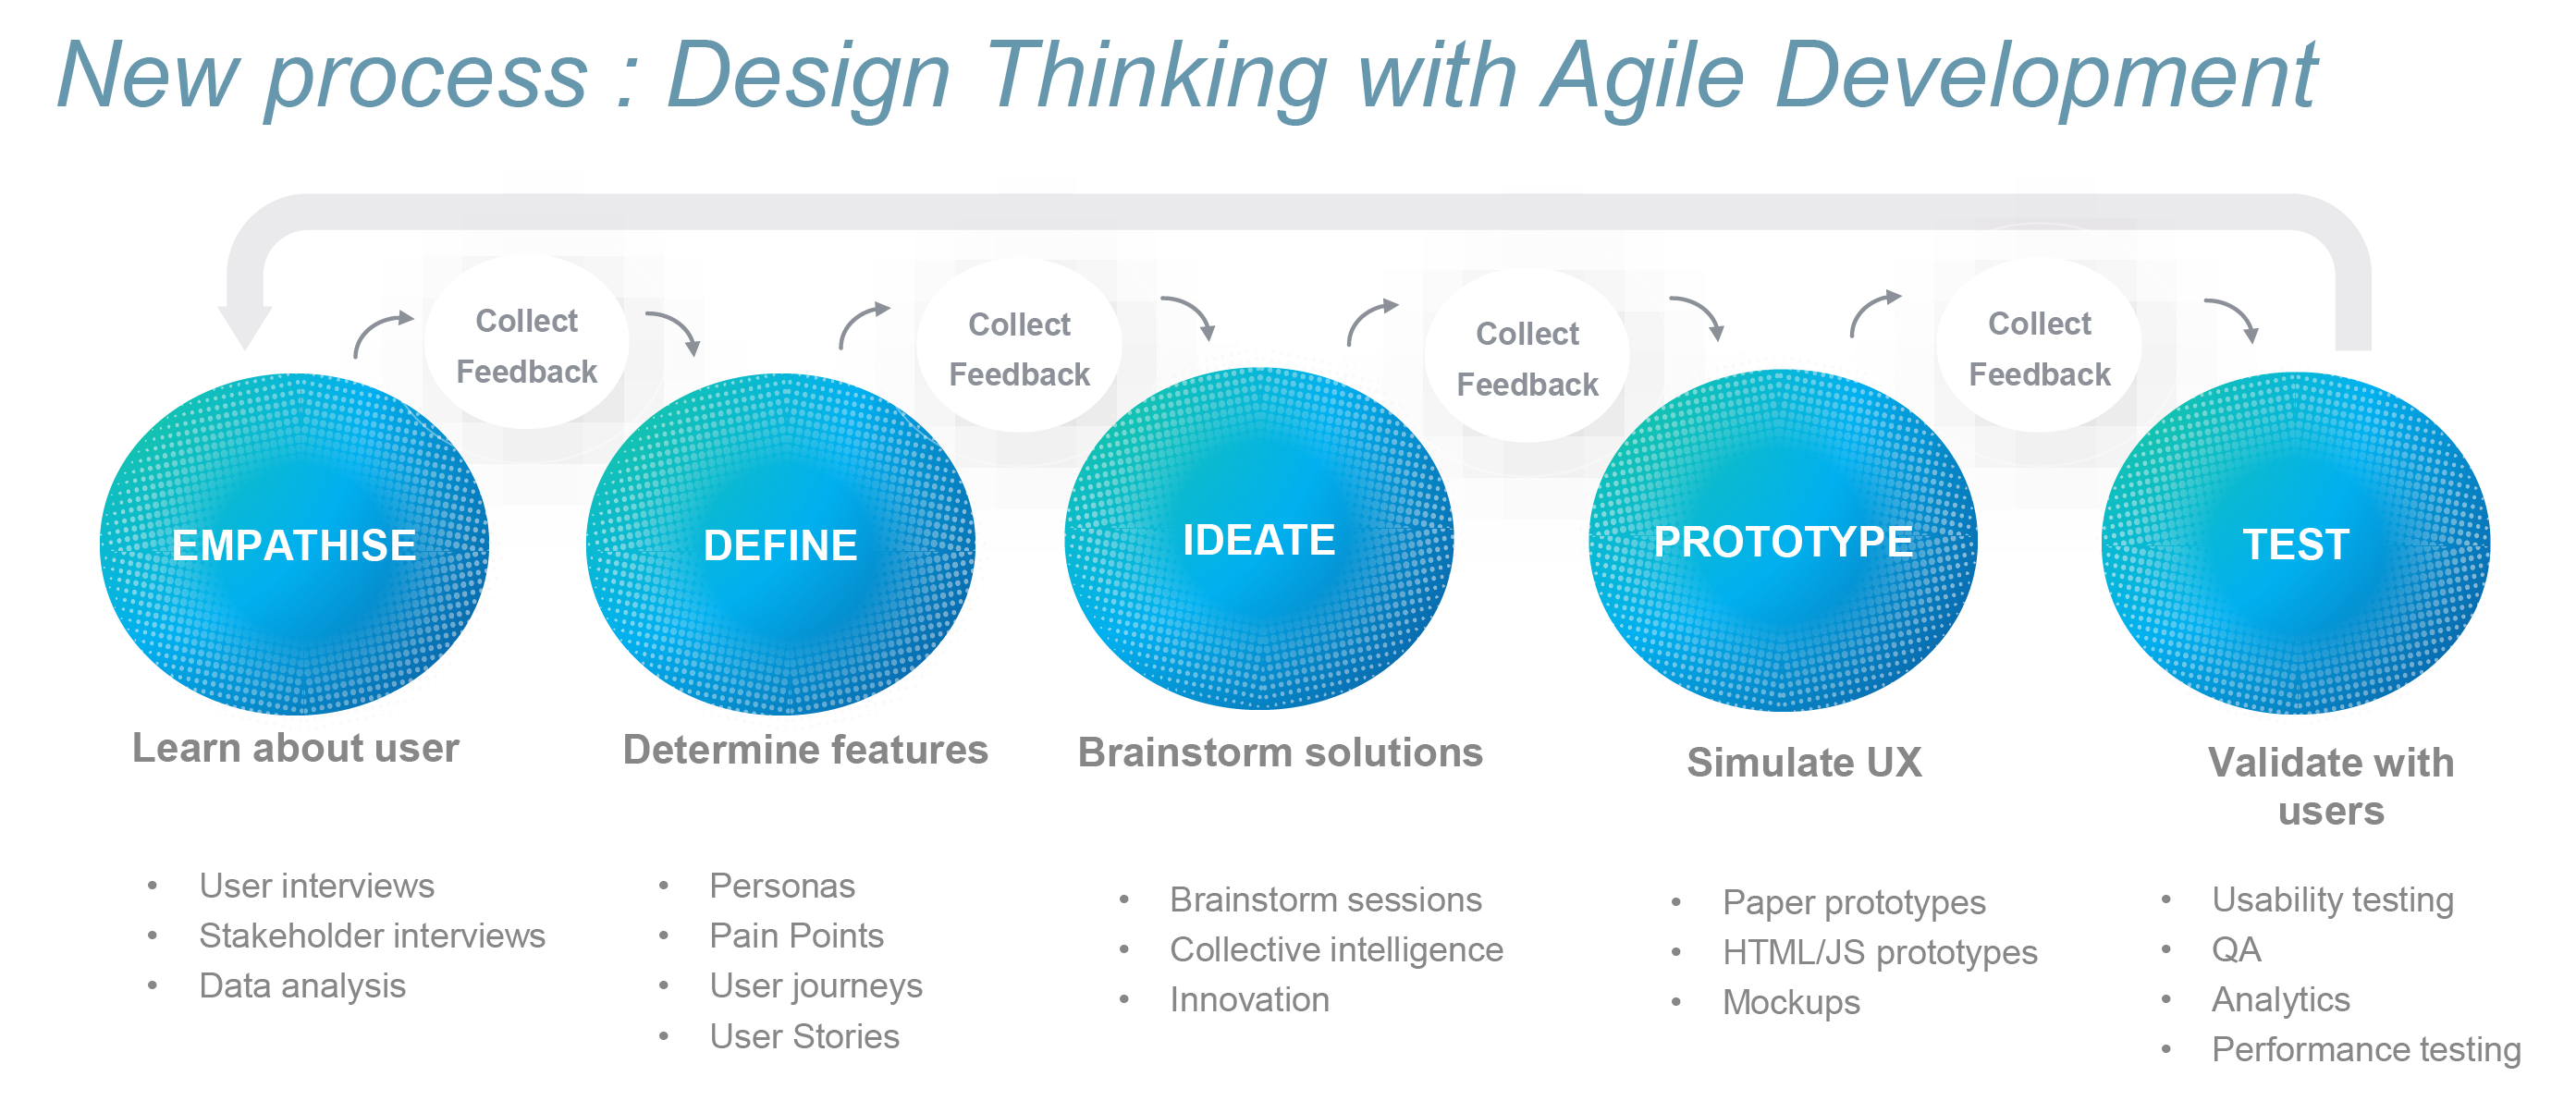 Figure 2. Design thinking and agile methodologies in action at the CDG Prévoyance